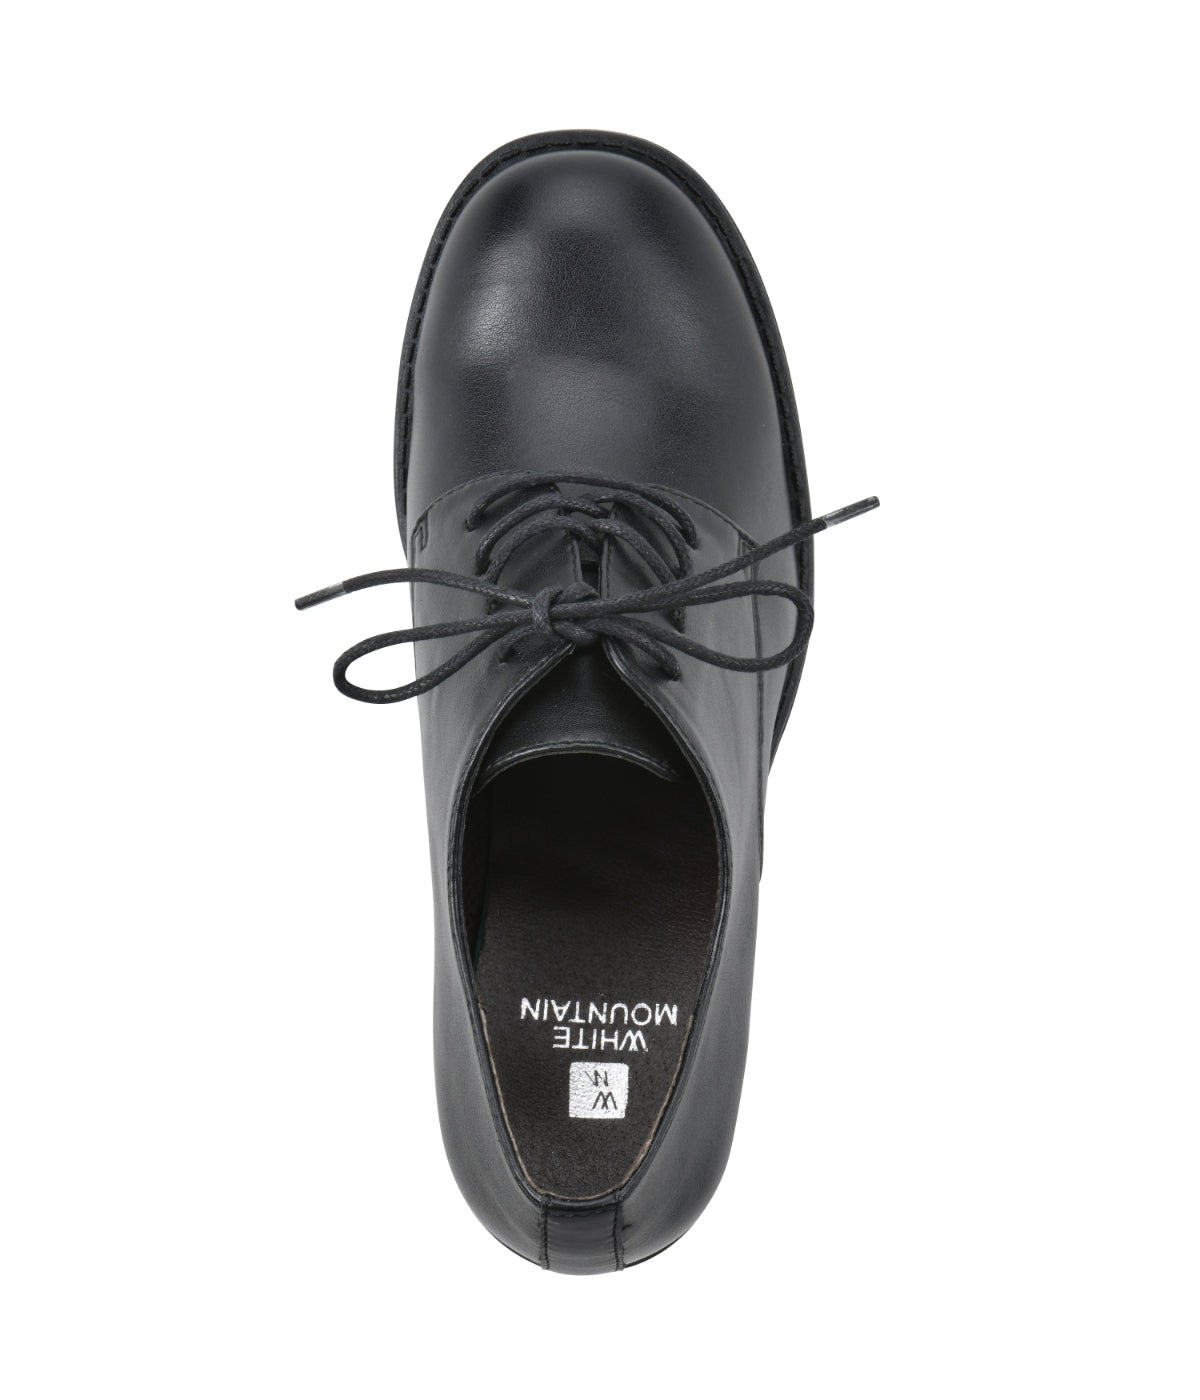 Bourbons Heeled Oxfords Black/Smooth